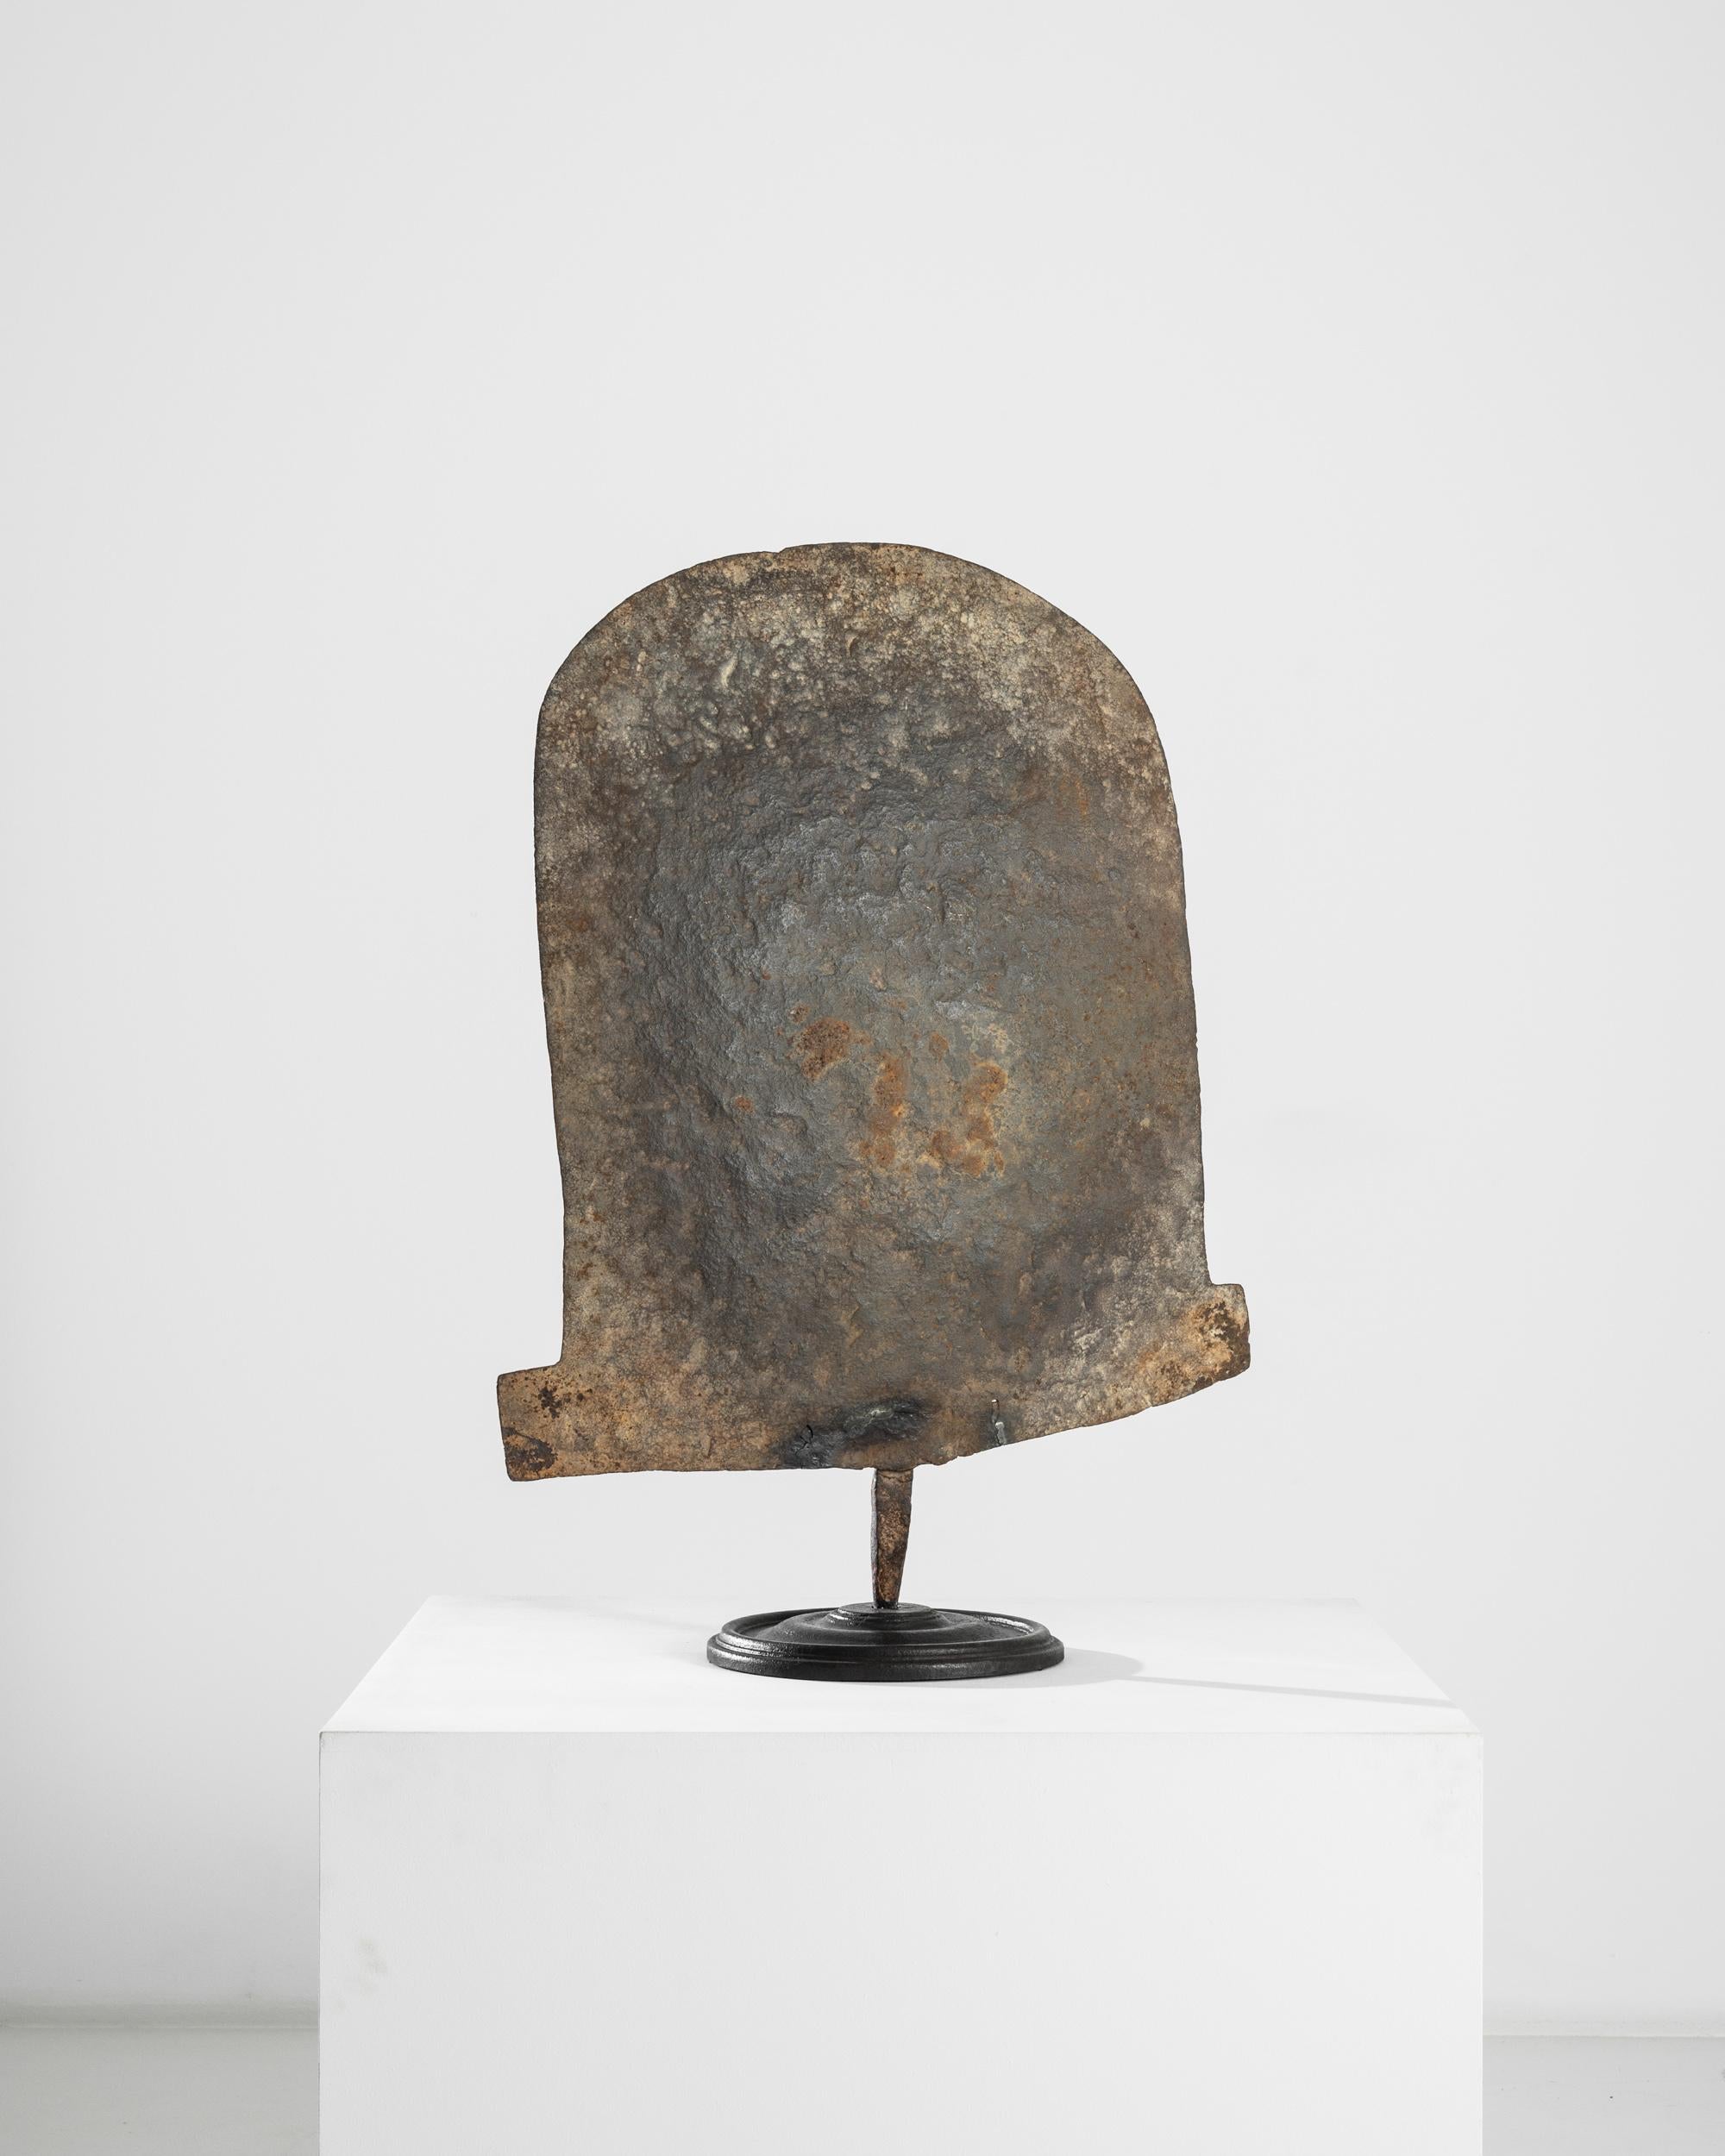 This fascinating piece is an example of shovel currency, formerly used among the peoples of northern Nigeria as a form of monetary exchange. Forged iron would have been traded for goods or used in wedding negotiations — and the large size of this